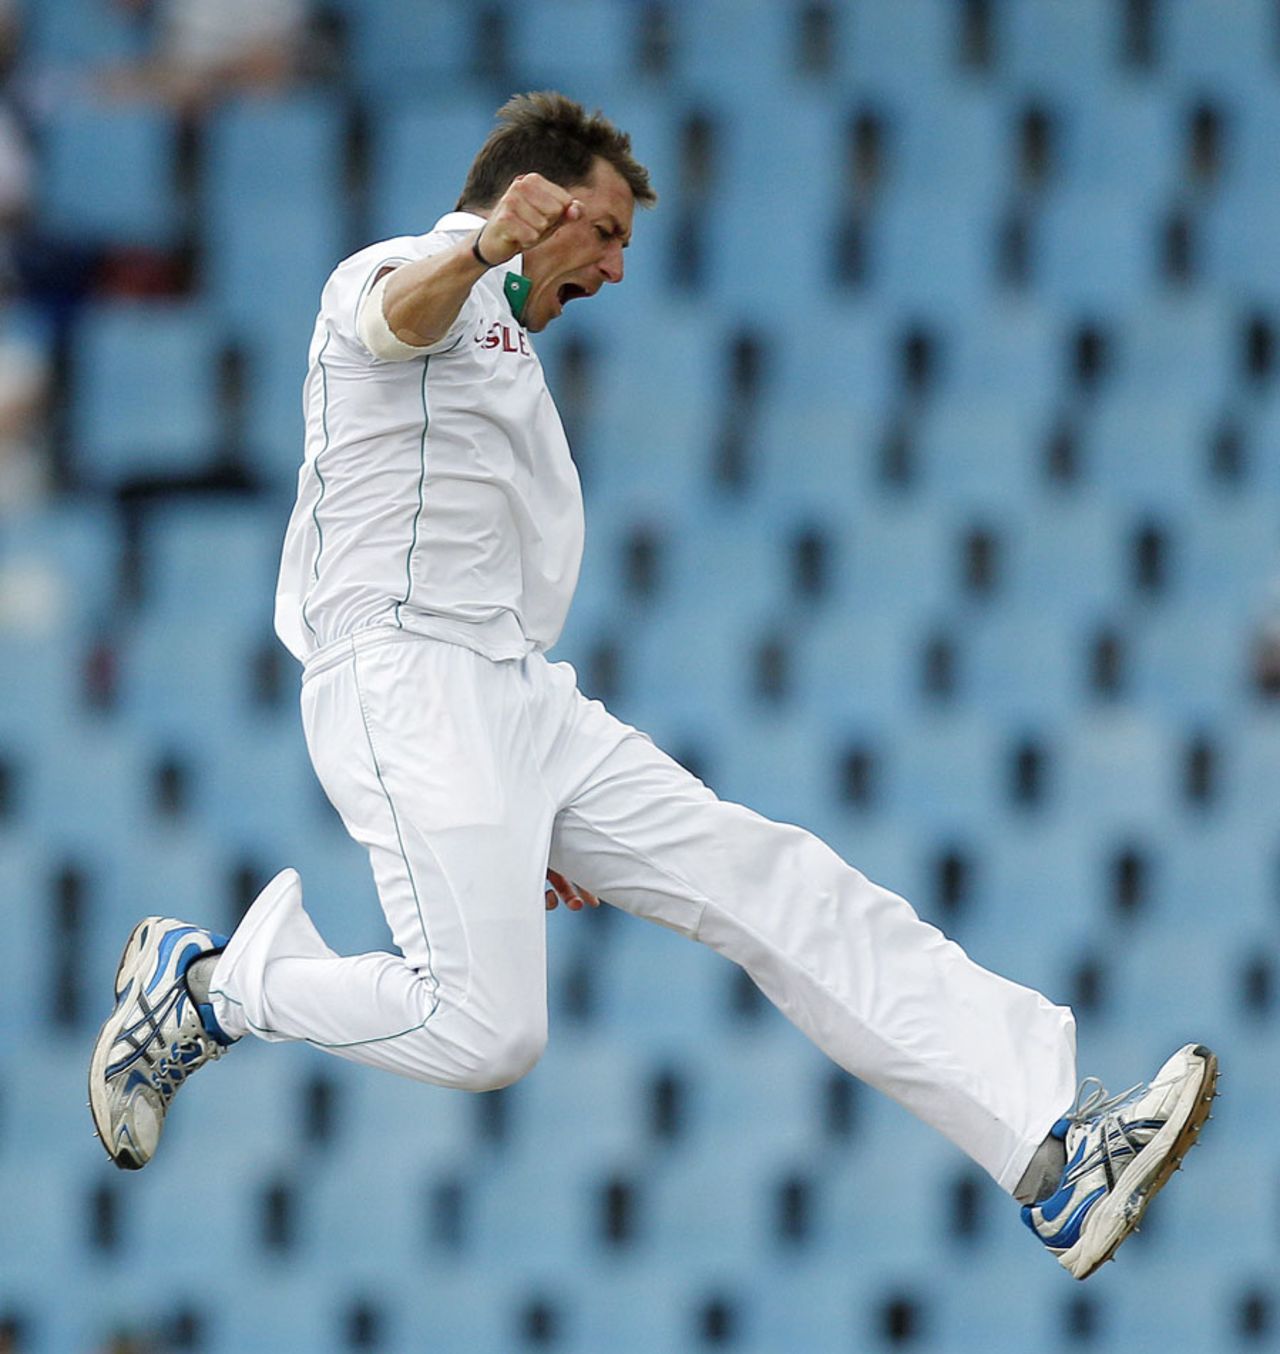 Dale Steyn leaps for joy after getting rid off MS Dhoni, South Africa v India, 1st Test, Centurion, 4th day, December 19, 2010